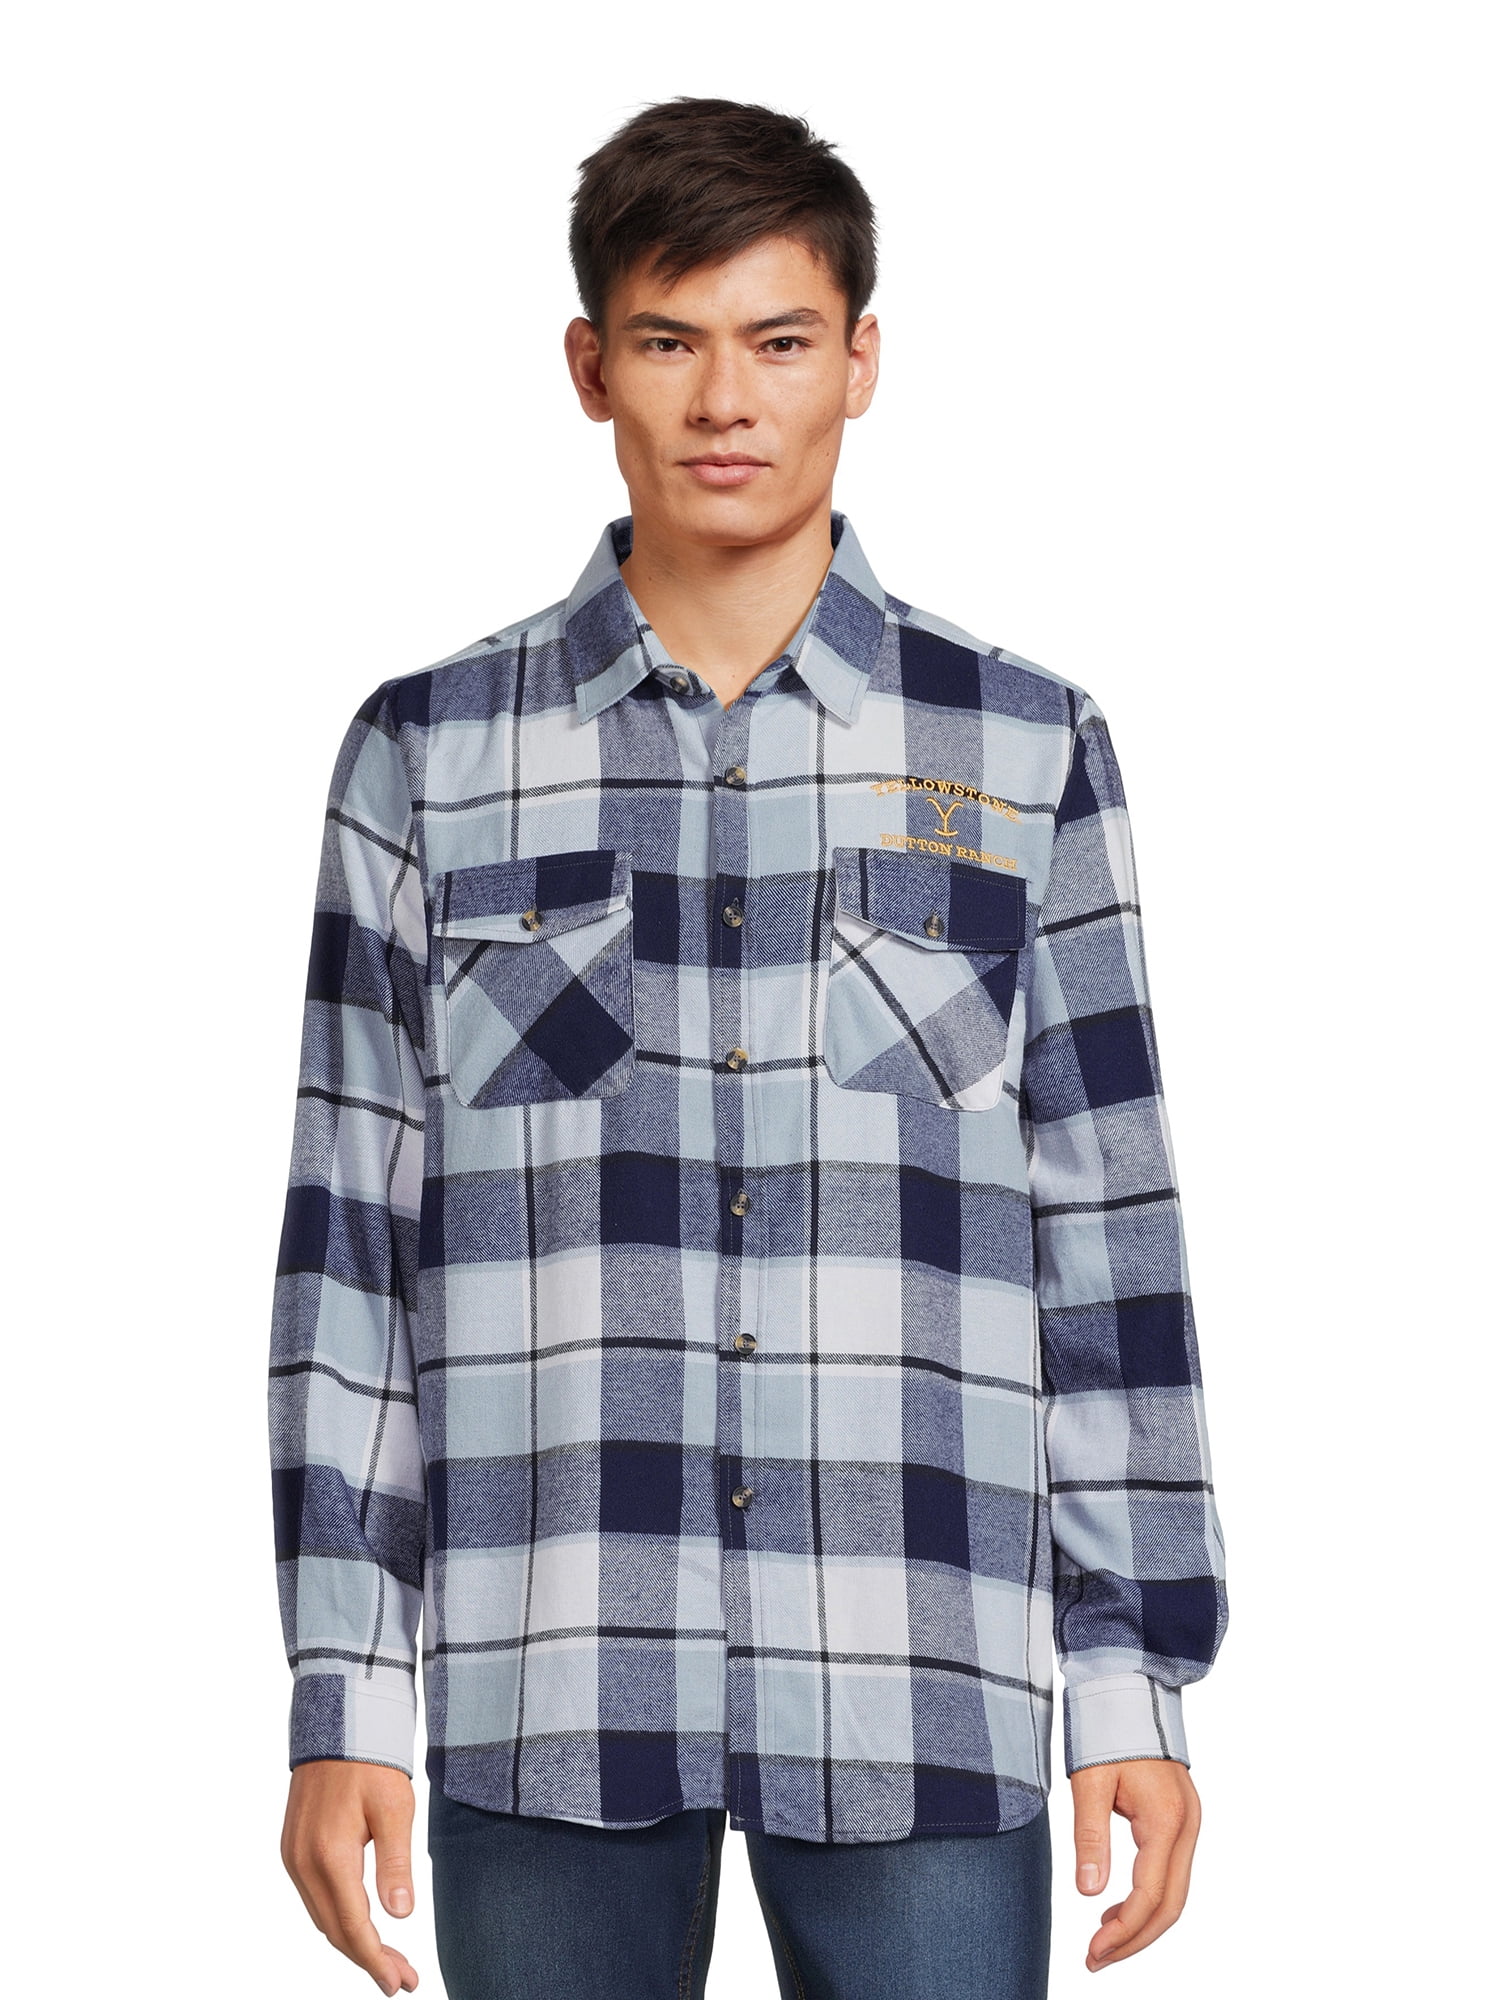 Yellowstone Men's & Big Men's Embroidered Flannel Shirt, Sizes S-3XL ...